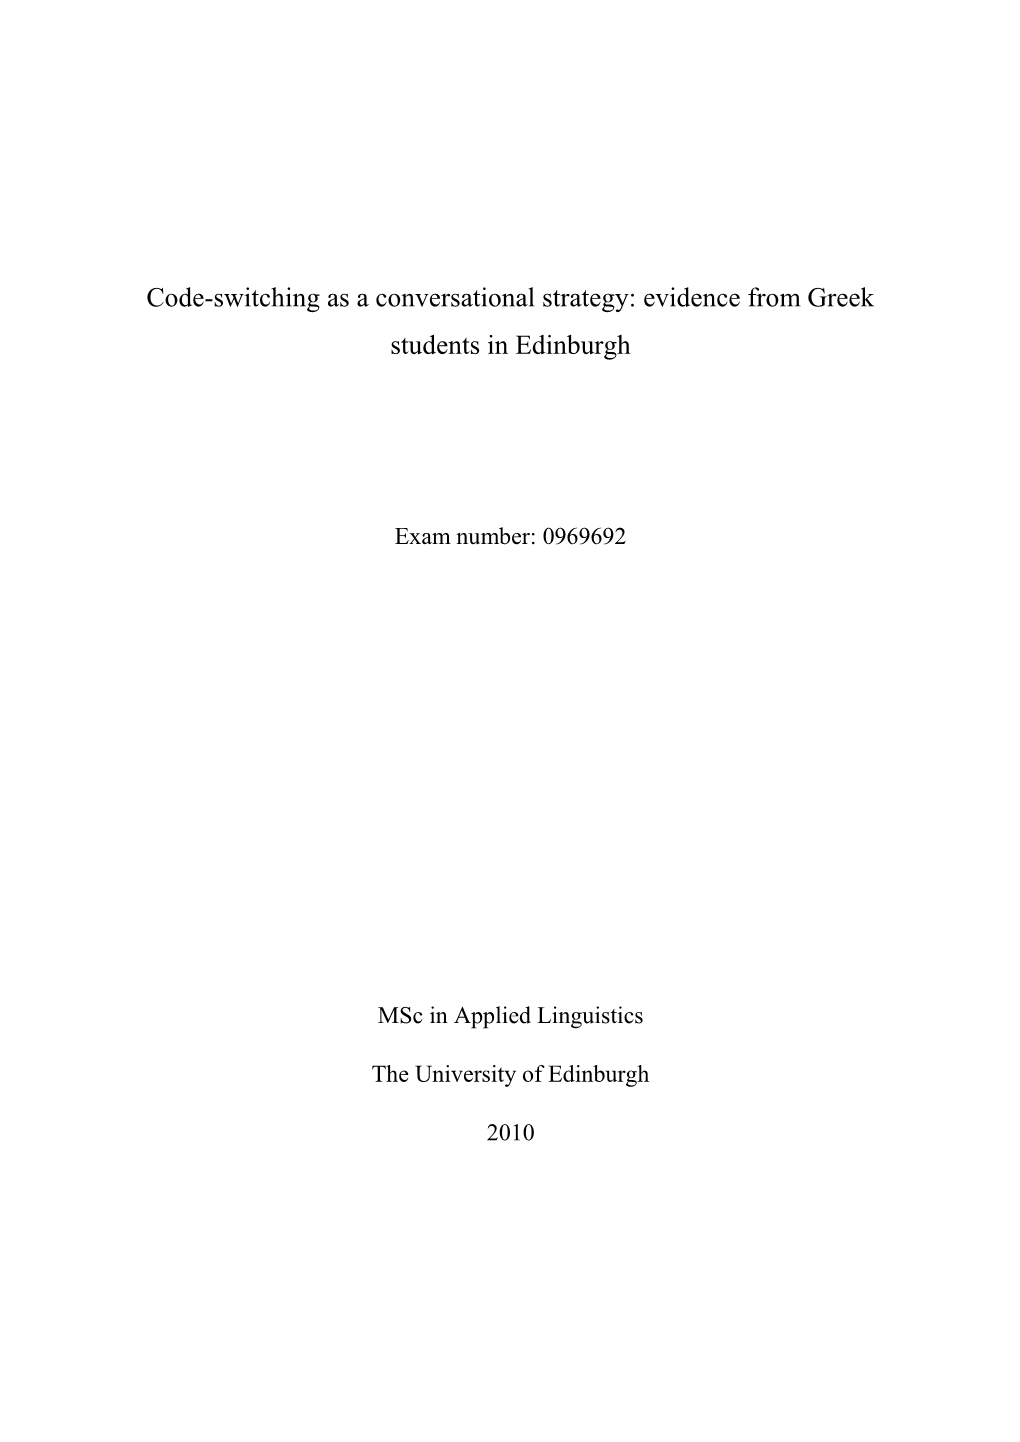 Code-Switching As a Conversational Strategy: Evidence from Greek Students in Edinburgh